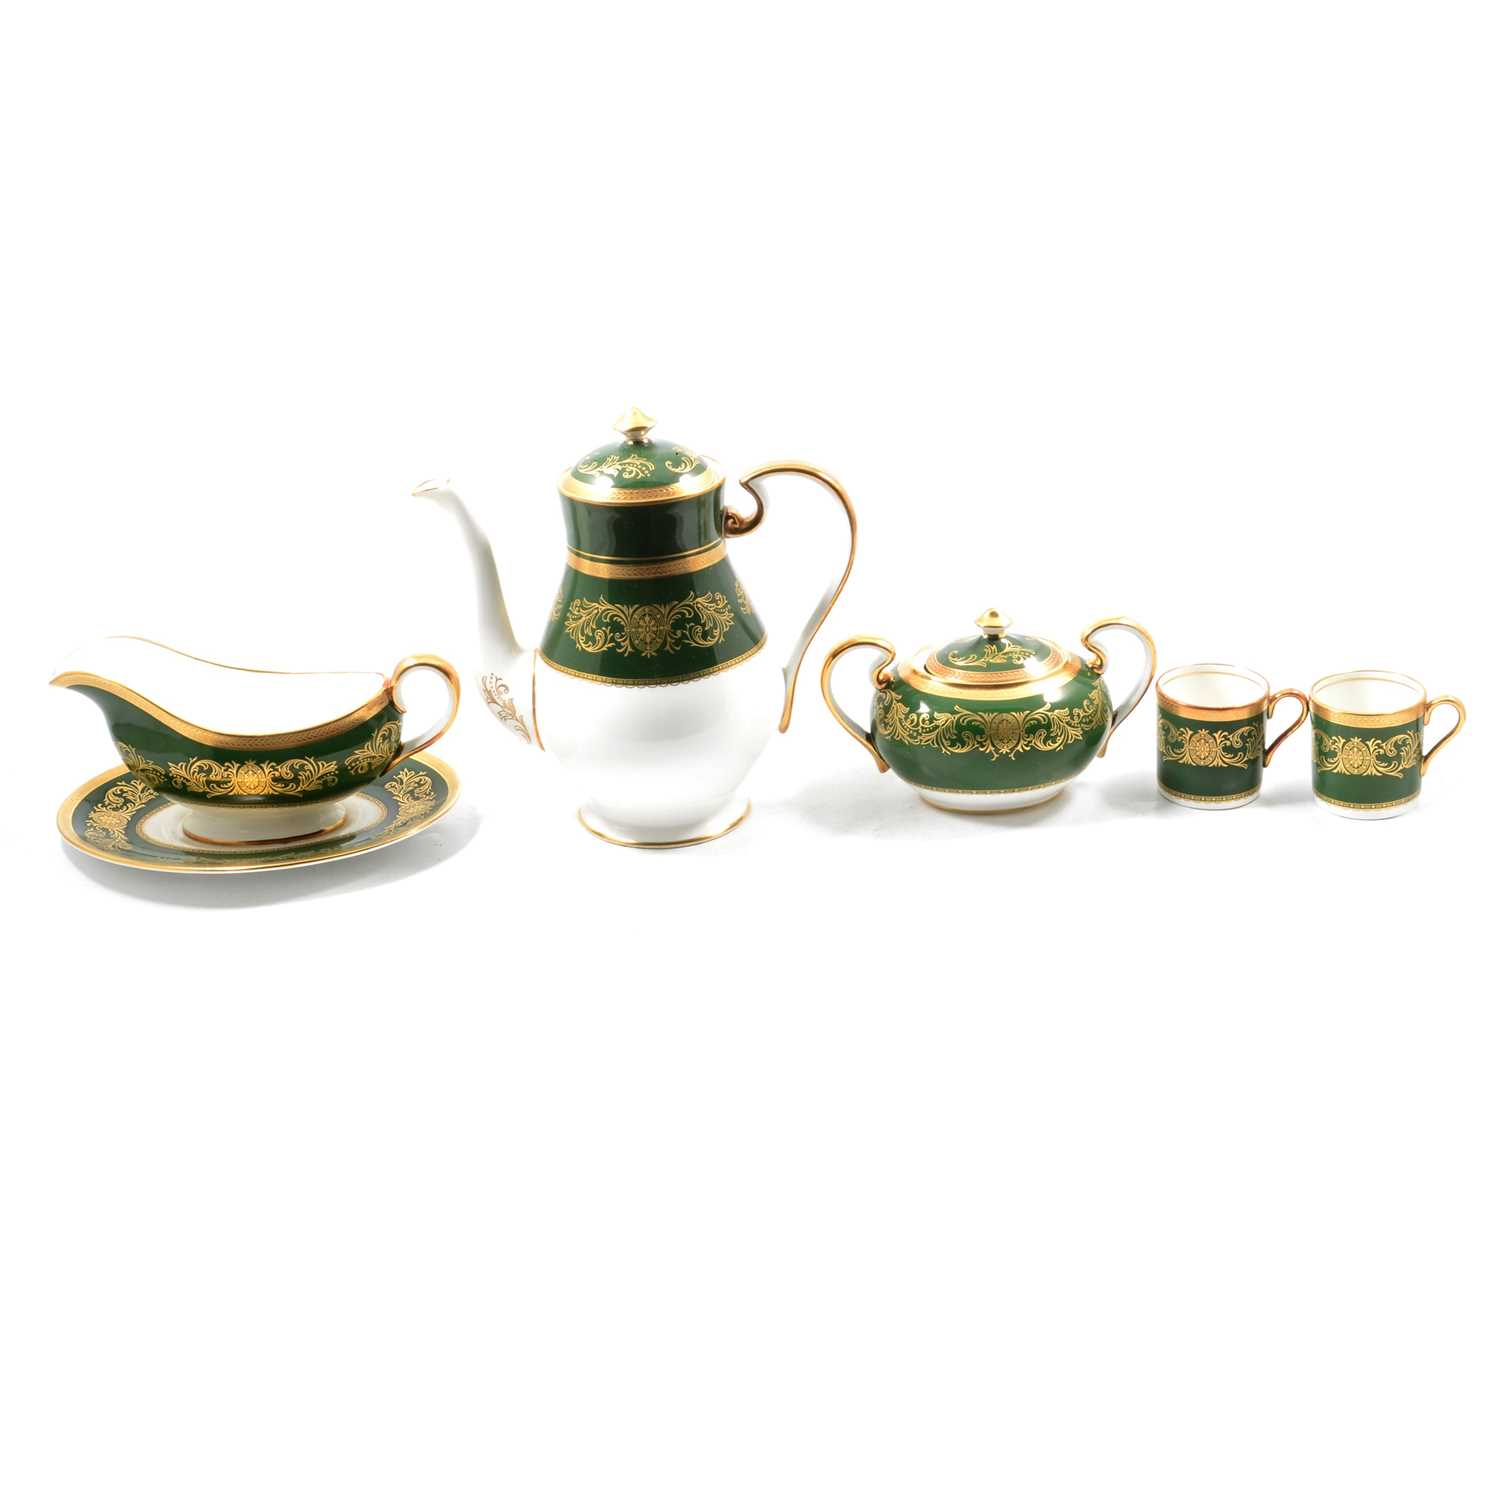 Lot 93 - Comprehensive Aynsley dinner service, Imperial pattern, gilt on green colourway